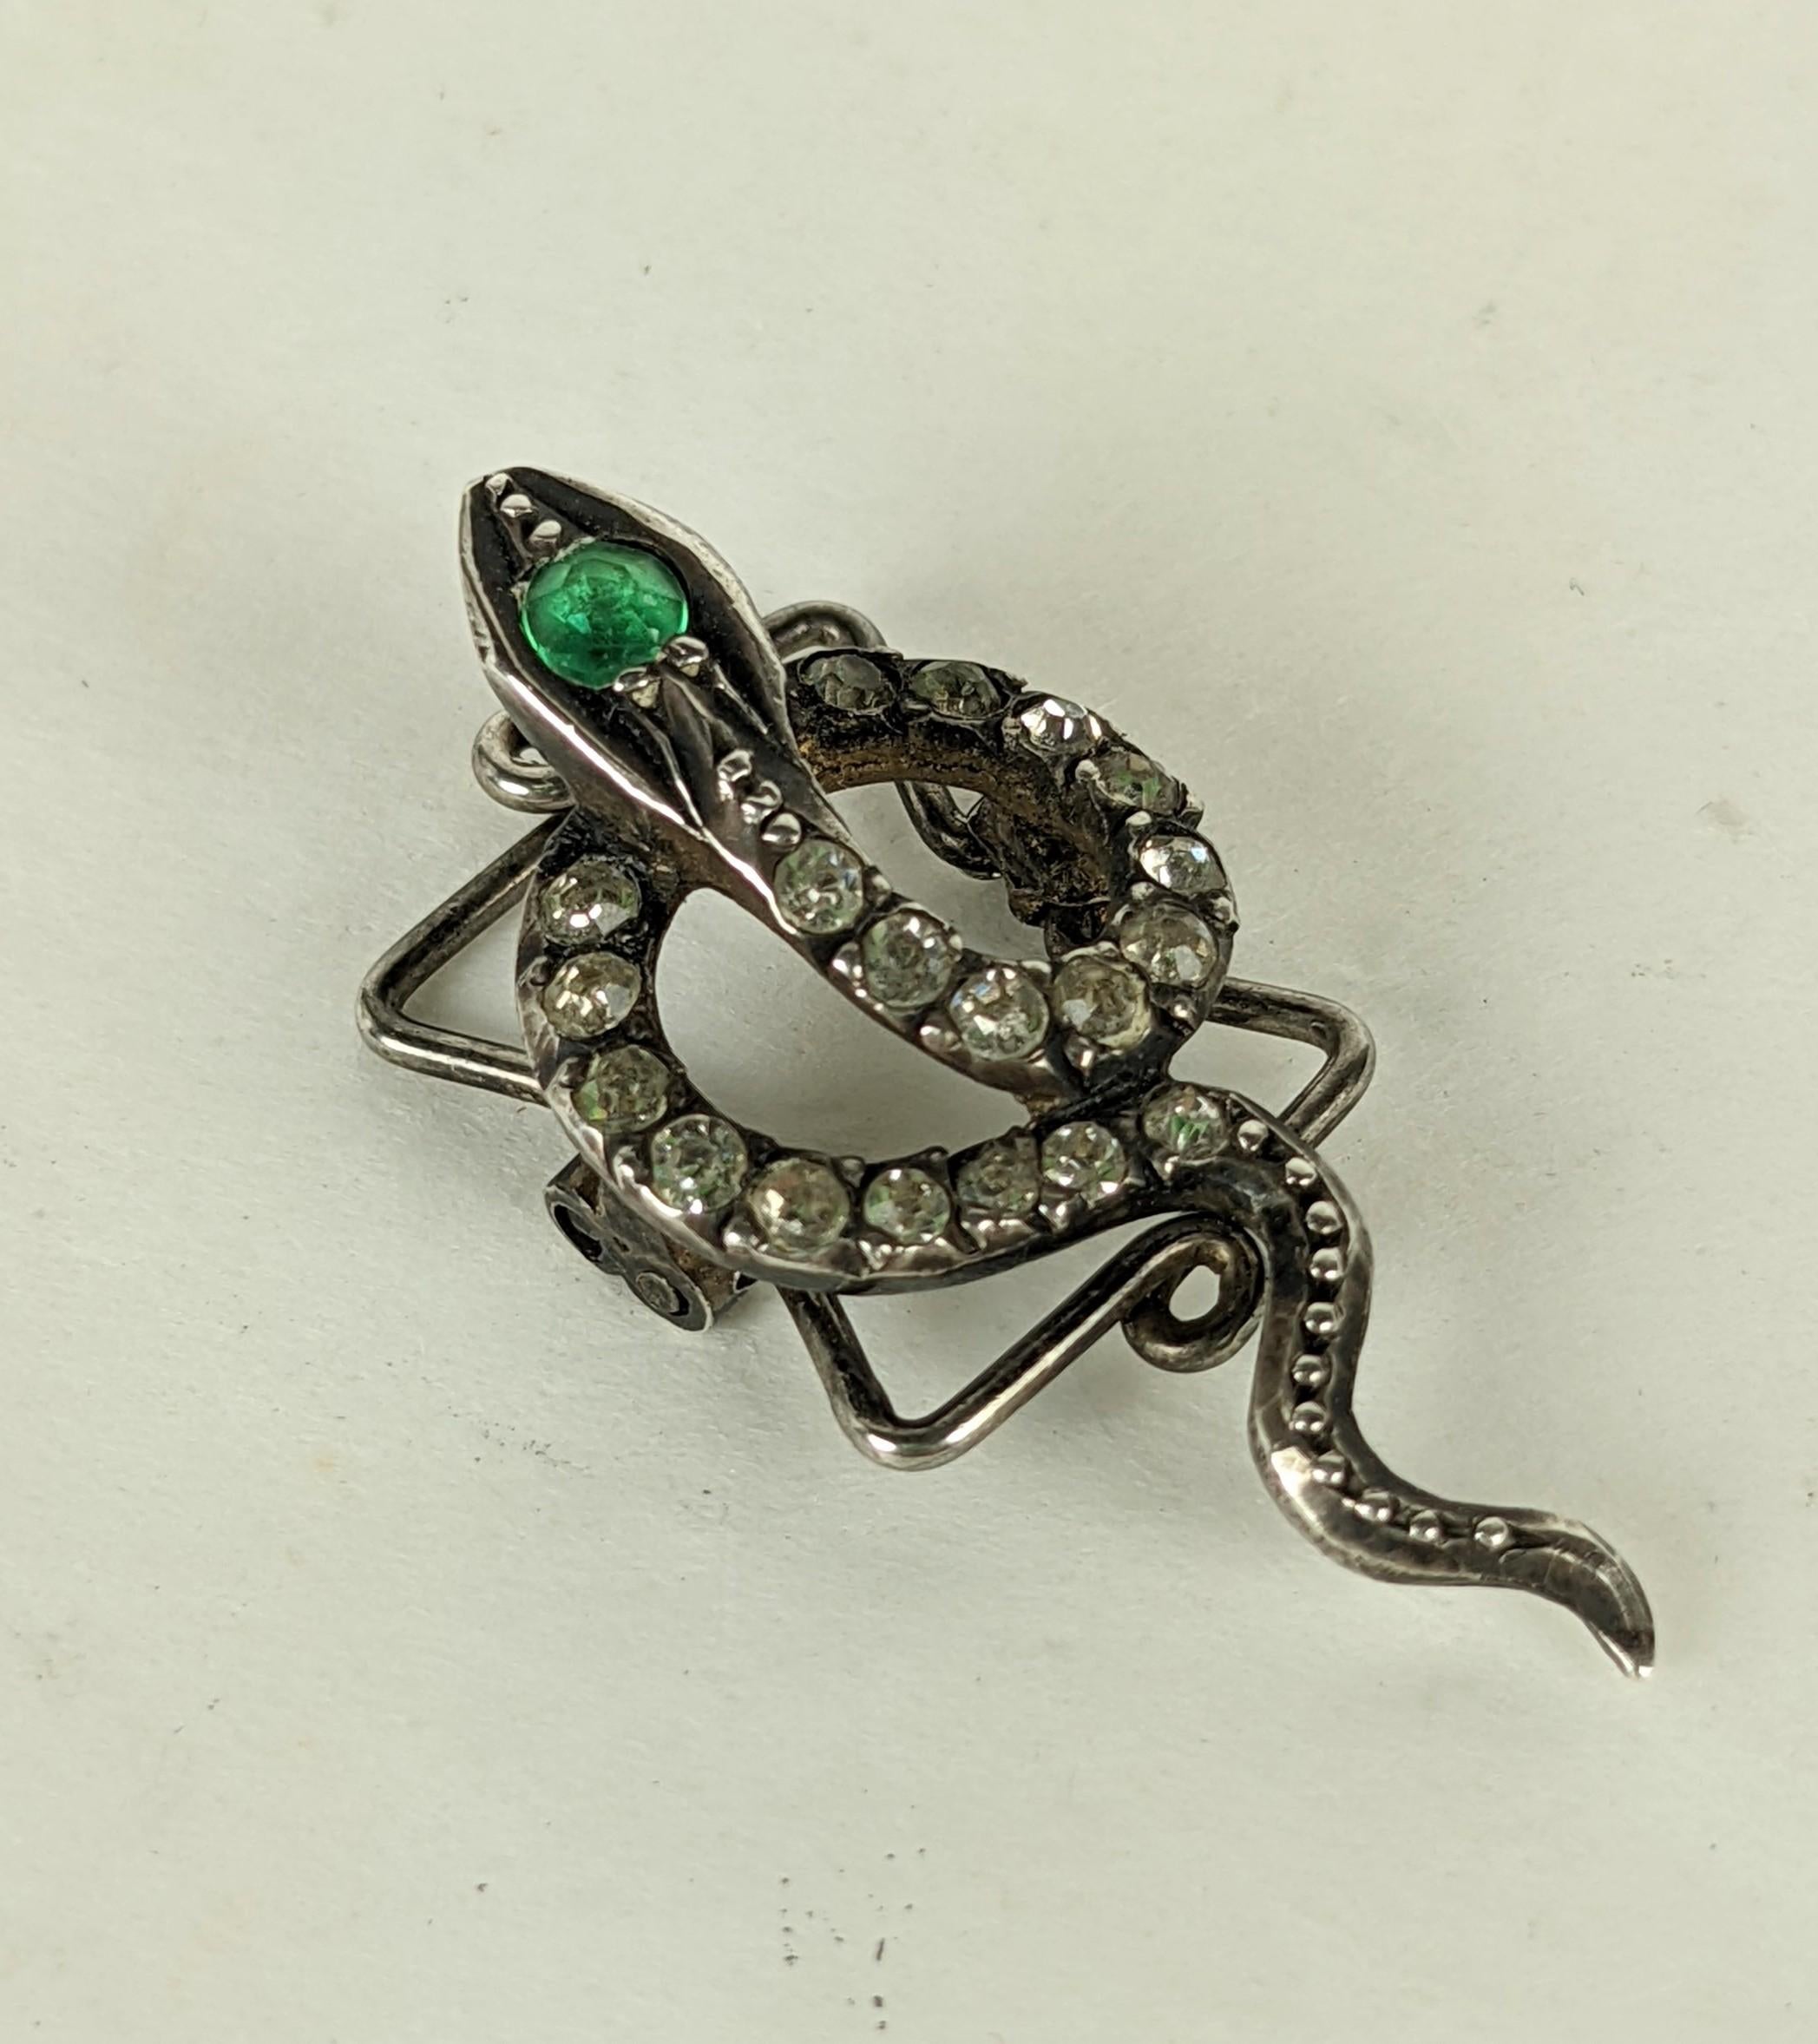 Charming Victorian Paste Snake Boutonniere or enhancer from the late 19th Century. Of French manufacture with hand set pastes in the body of the coiled snake. 
A spring mechanism on back allows the snake to be threaded with pearls/beads (8mm max) or